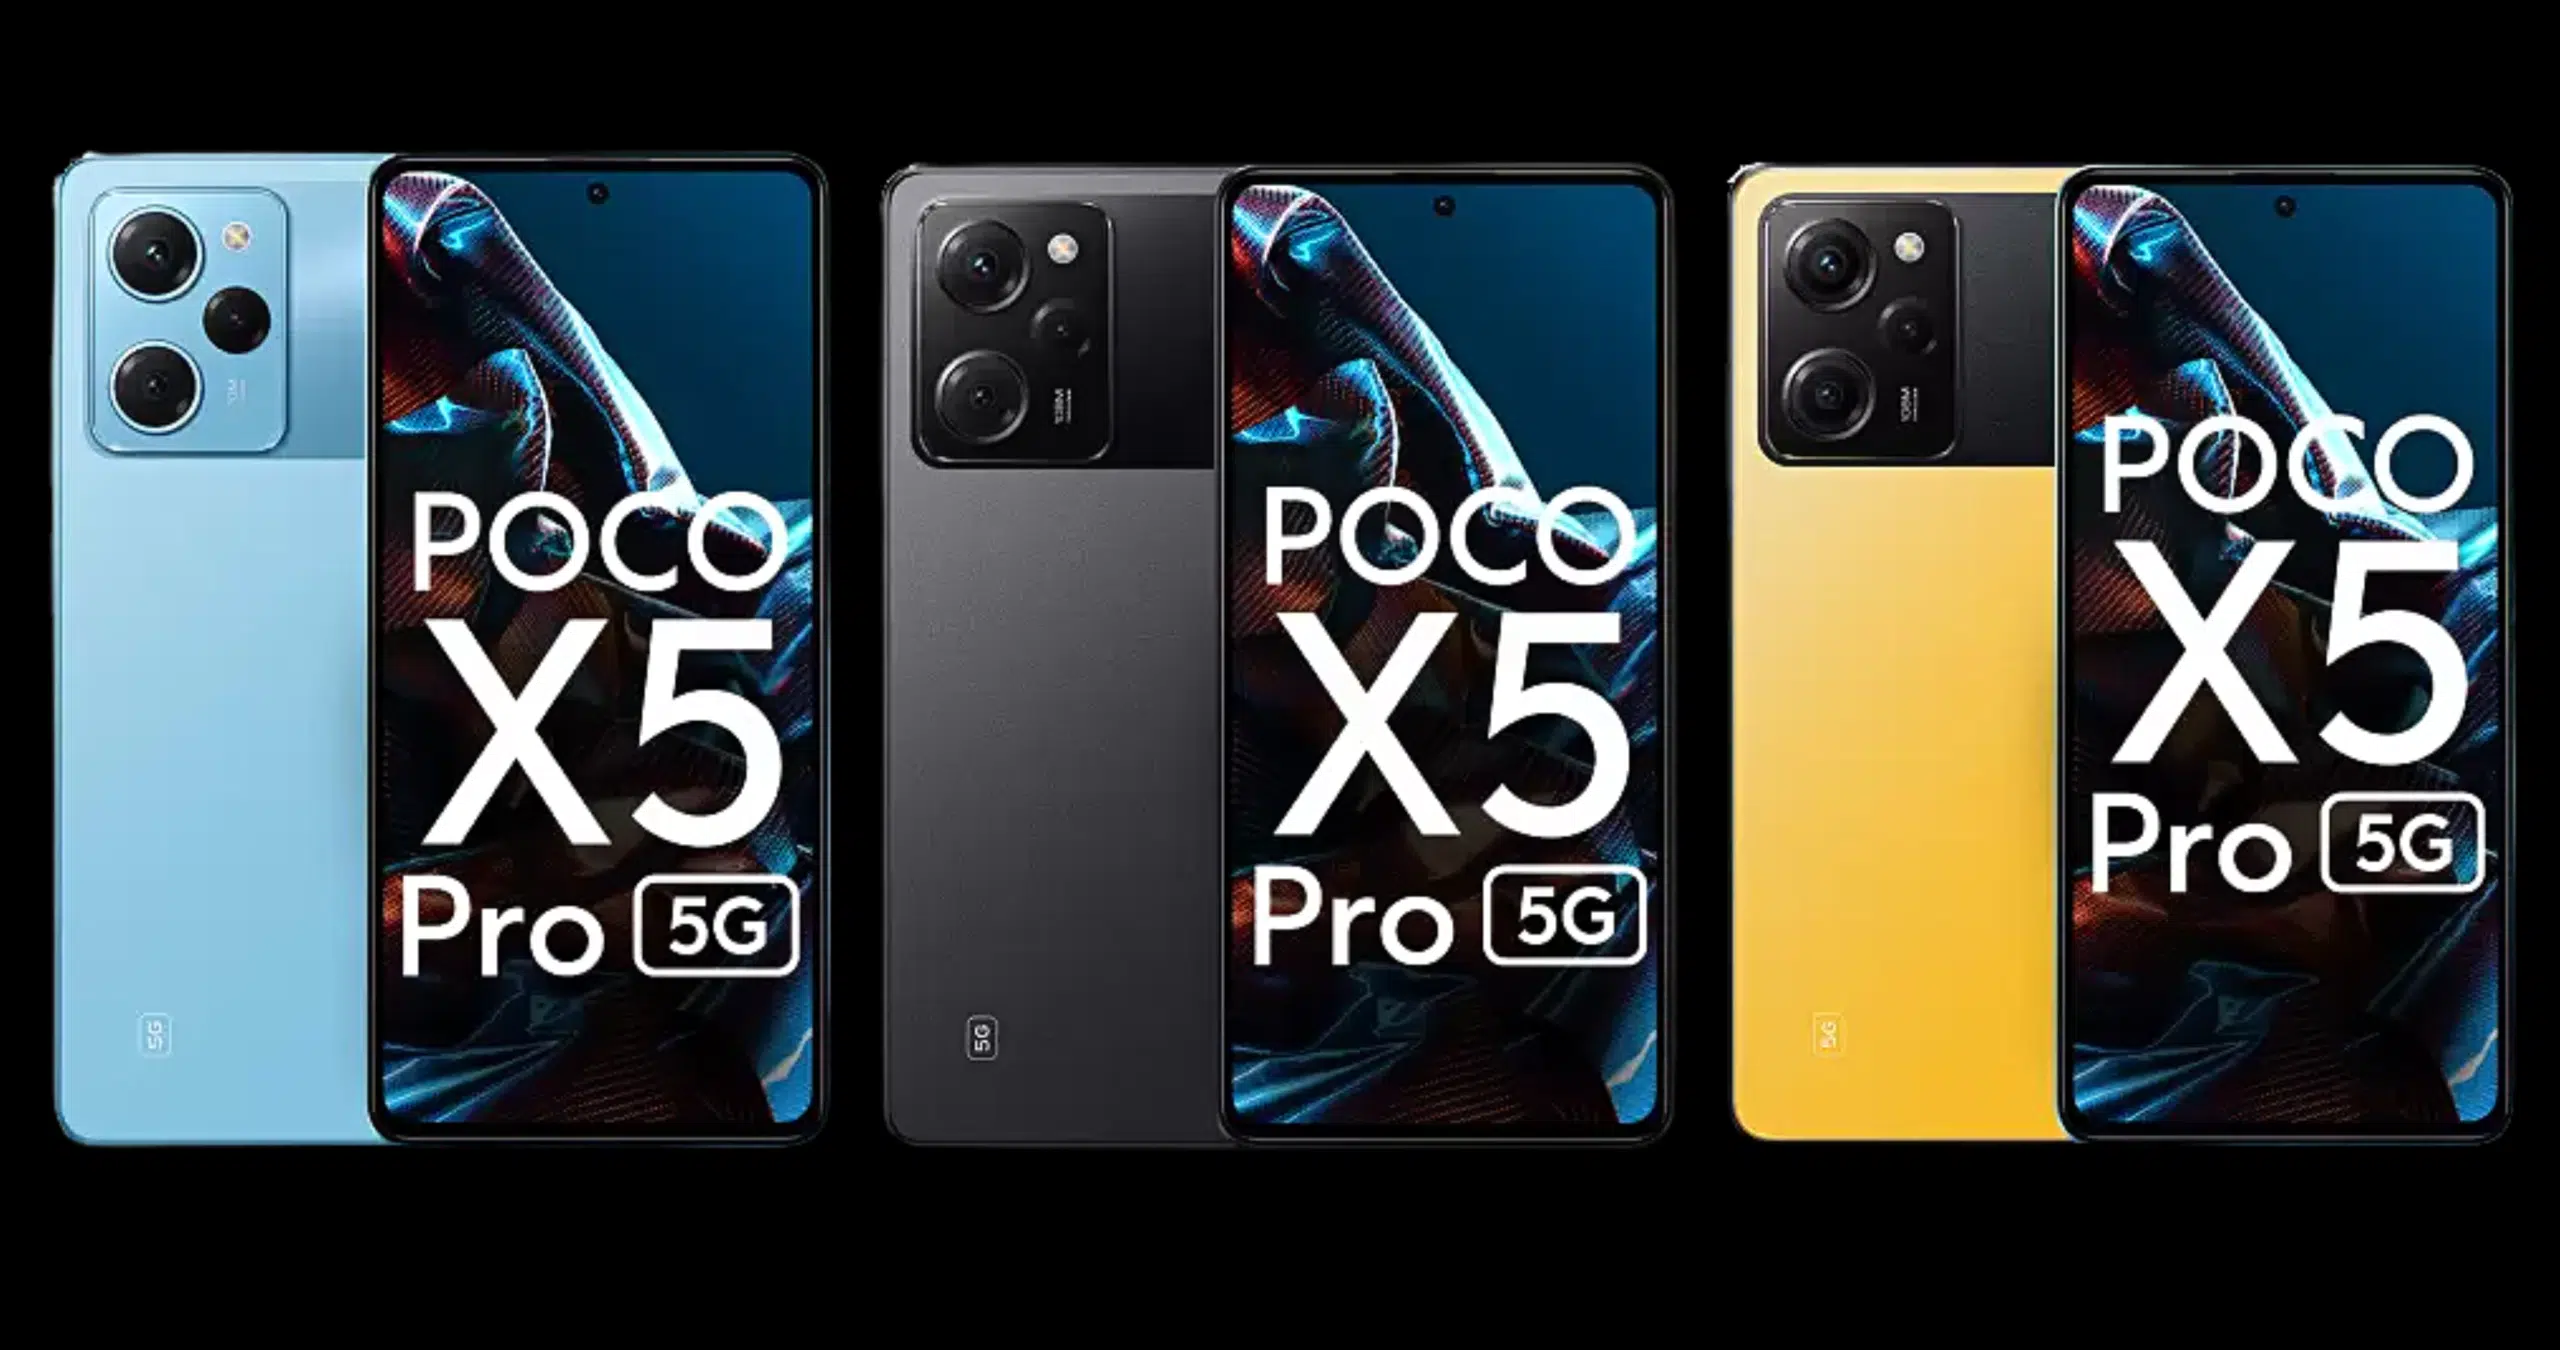 Poco X5 Pro 5G Officially launched with Qualcomm Snapdragon 778G SoC, 5000mAh battery